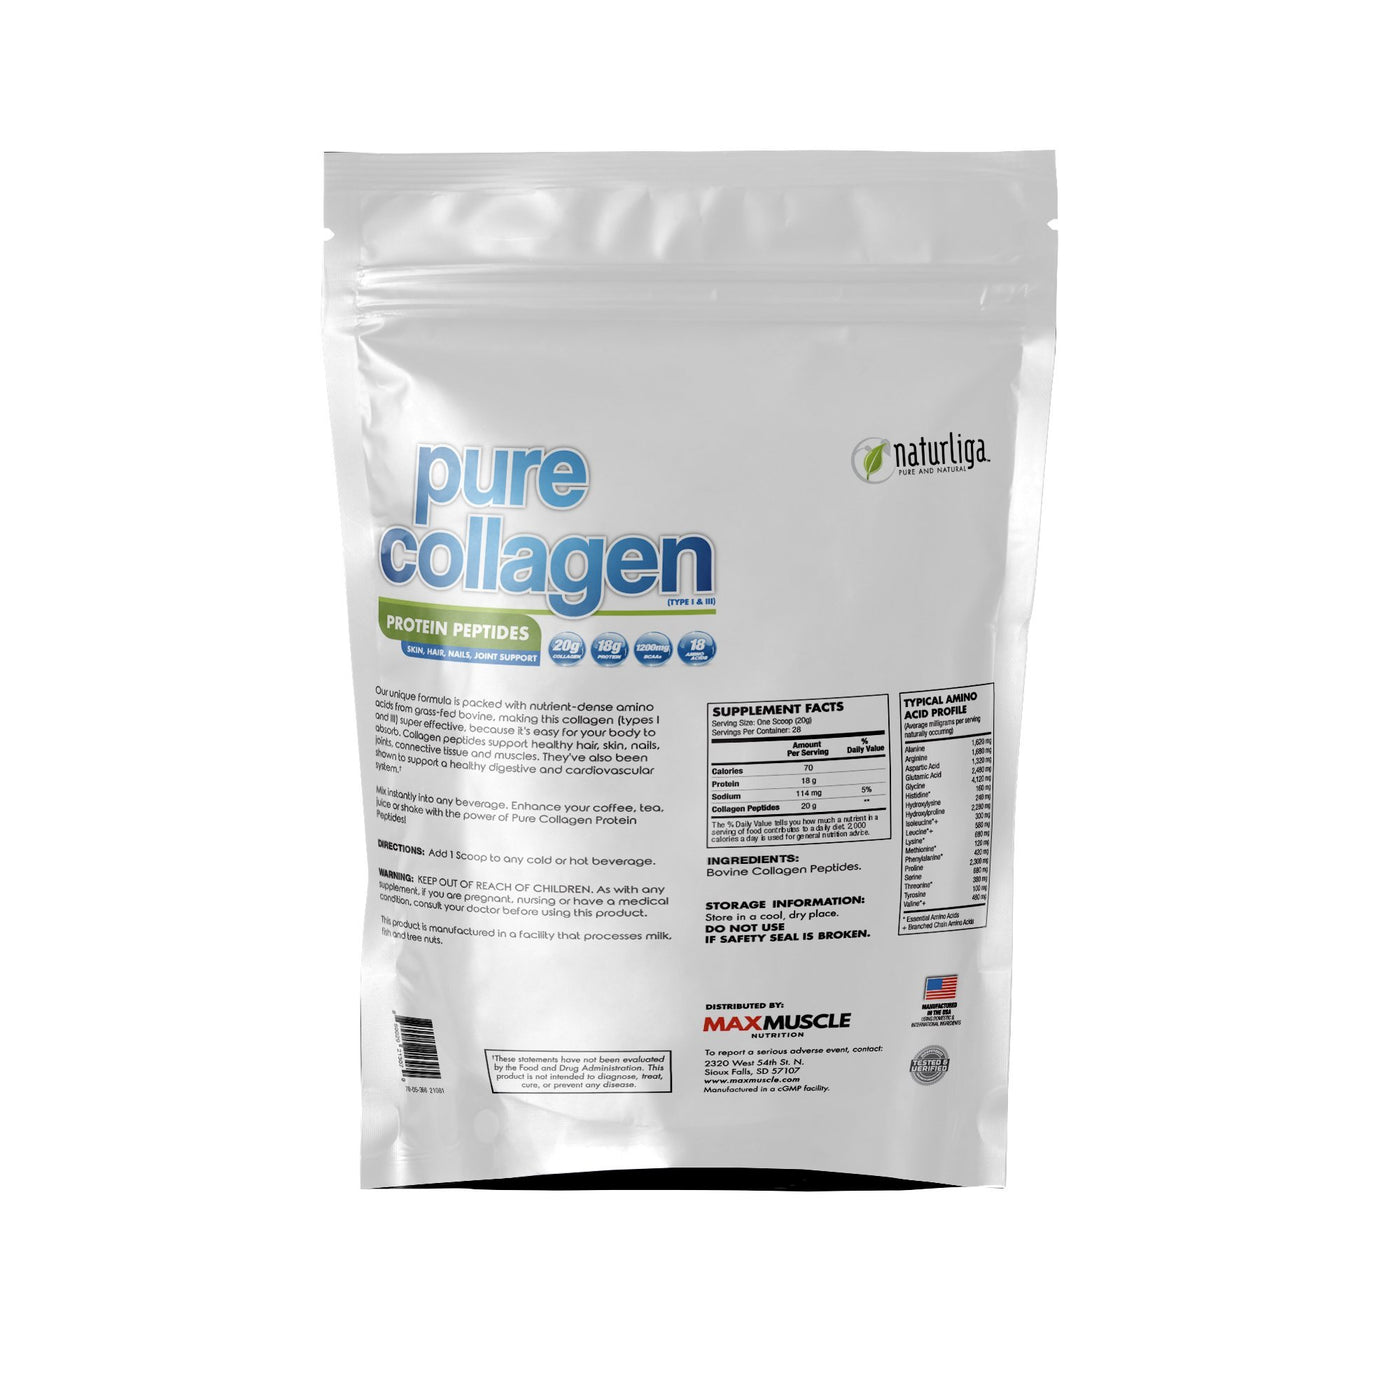 Pure Collagen - Max Muscle Nutrition